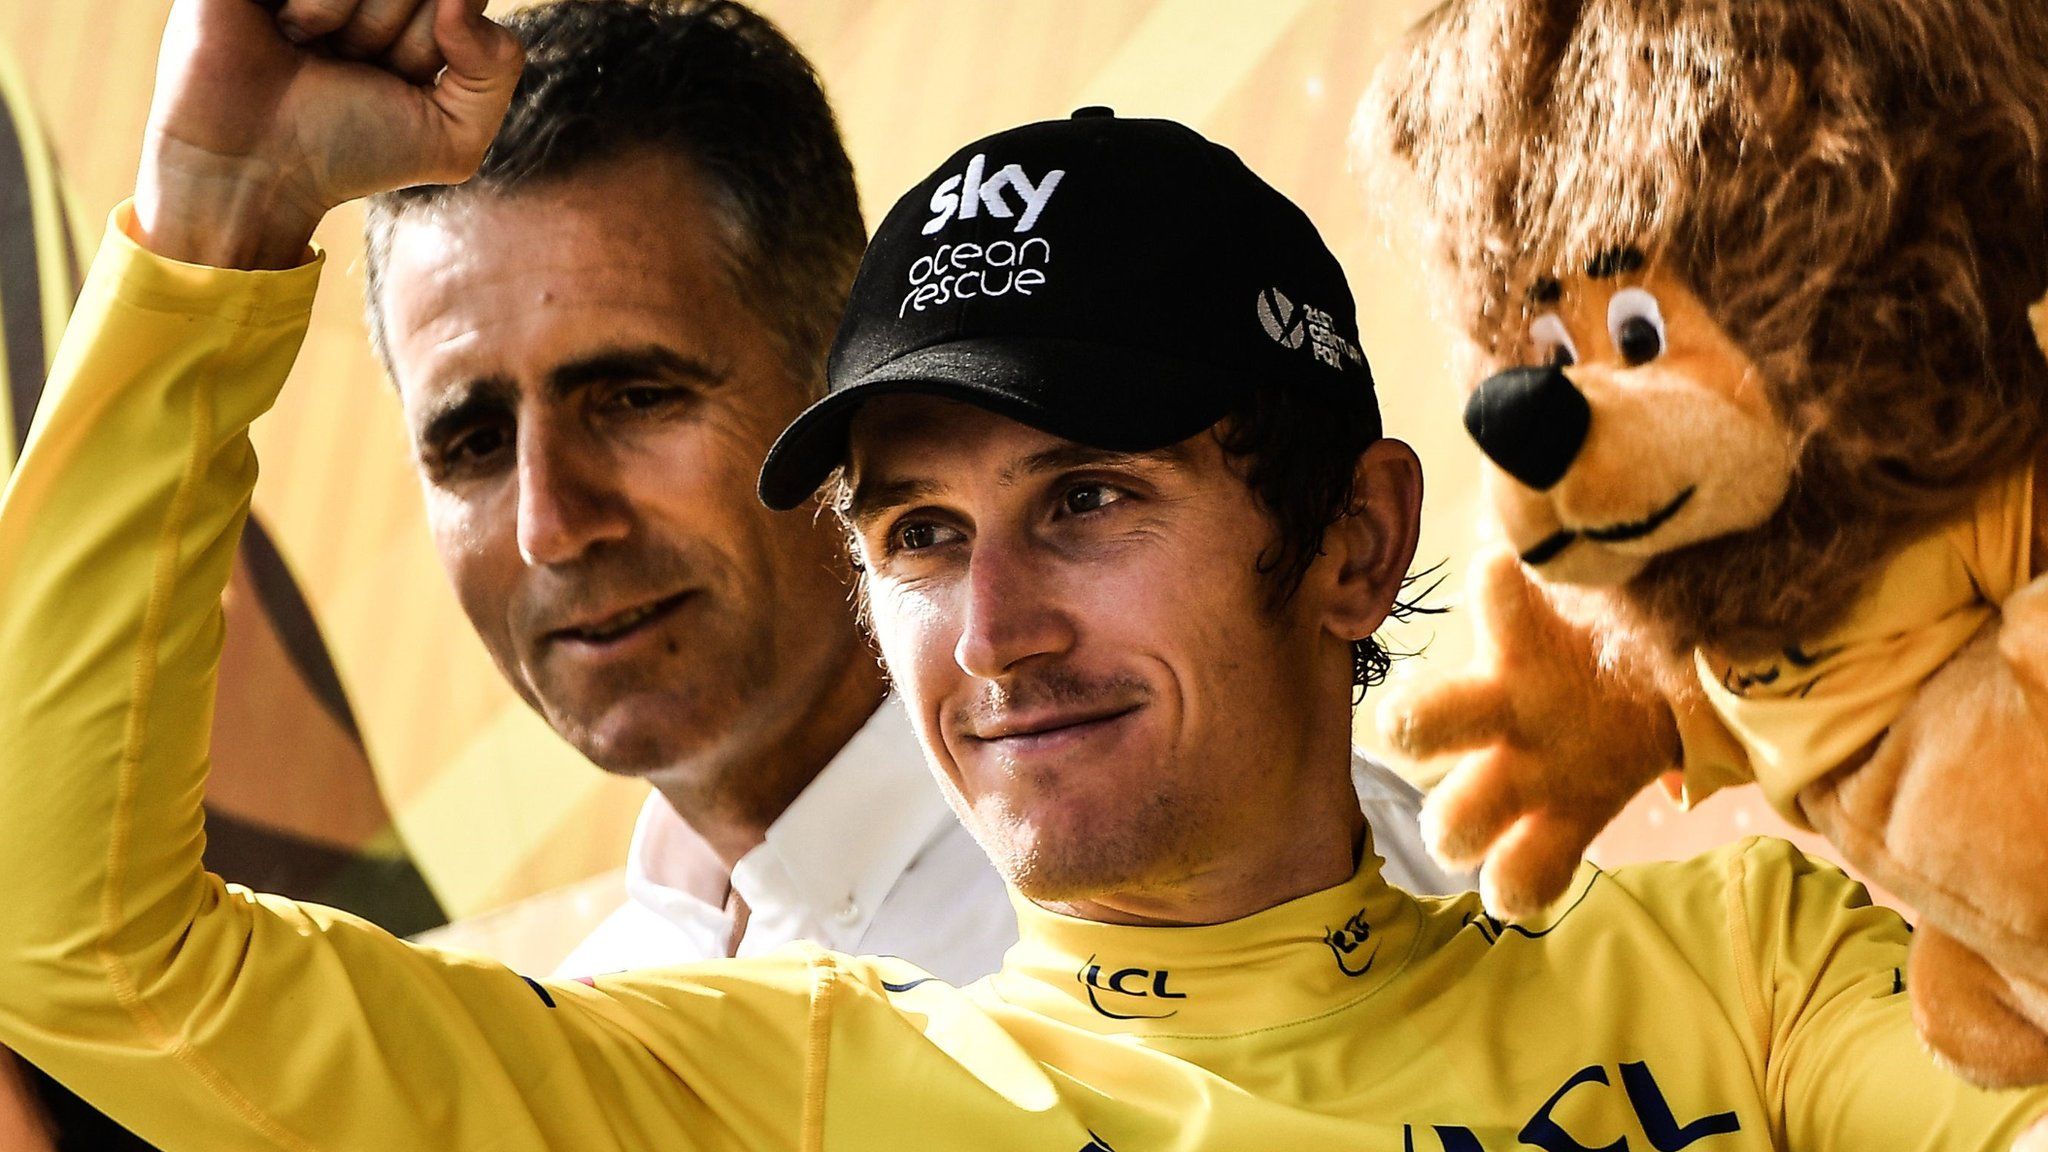 Geraint Thomas in yellow jersey